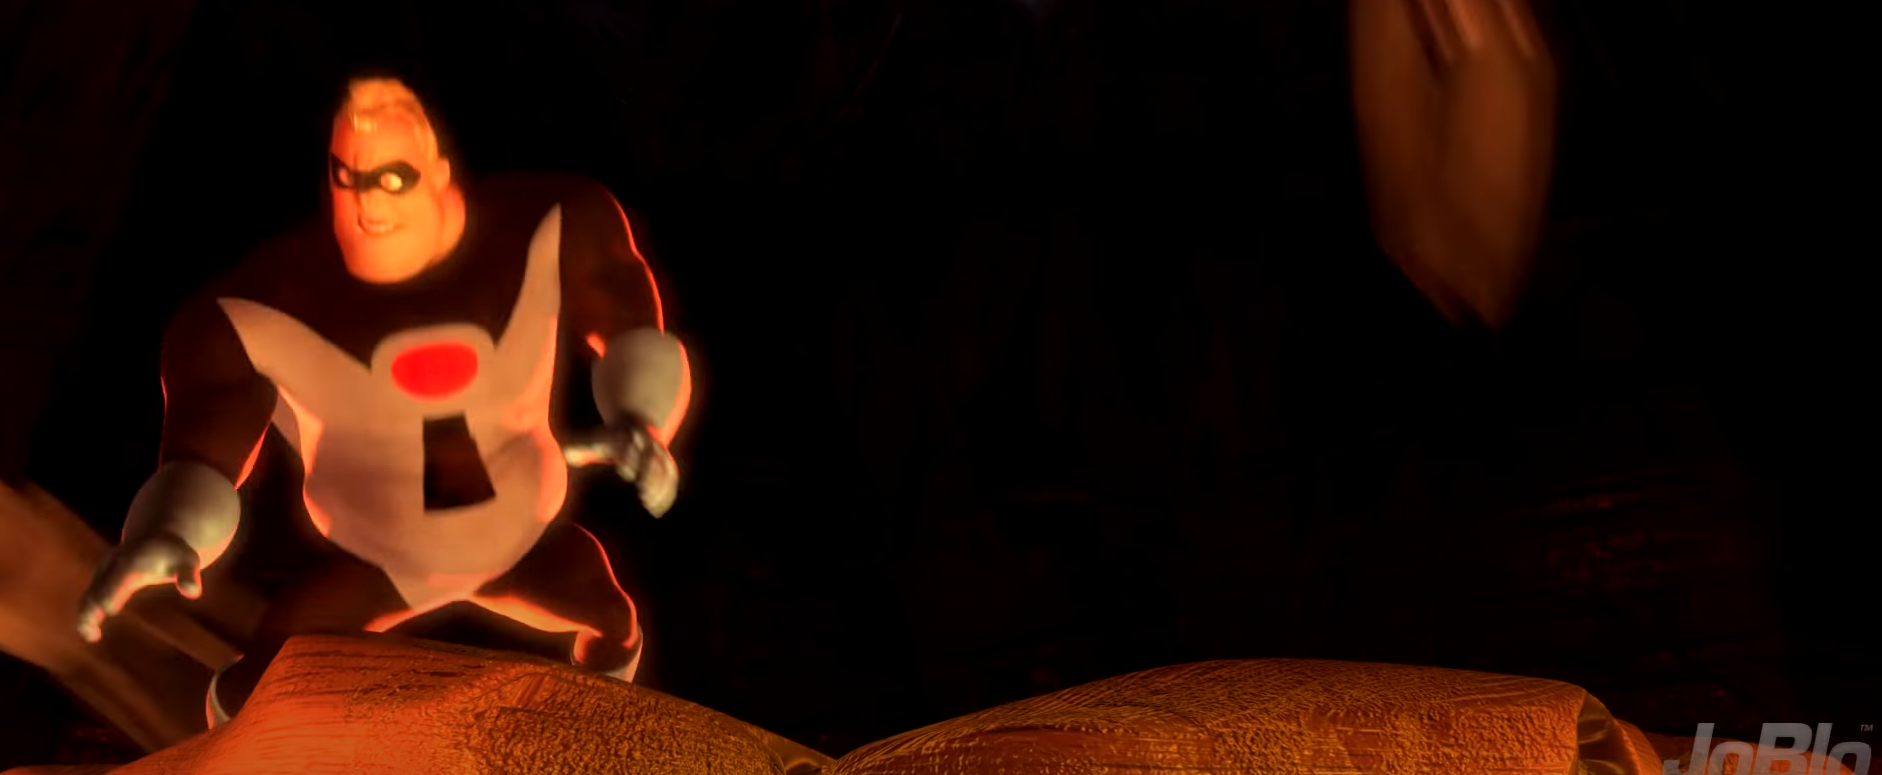 In The Incredibles (2005), Mr. Incredible was captured with Load-Increasing  Gravity Molecular-Apprehender (LIGMA) Balls : r/shittymoviedetails